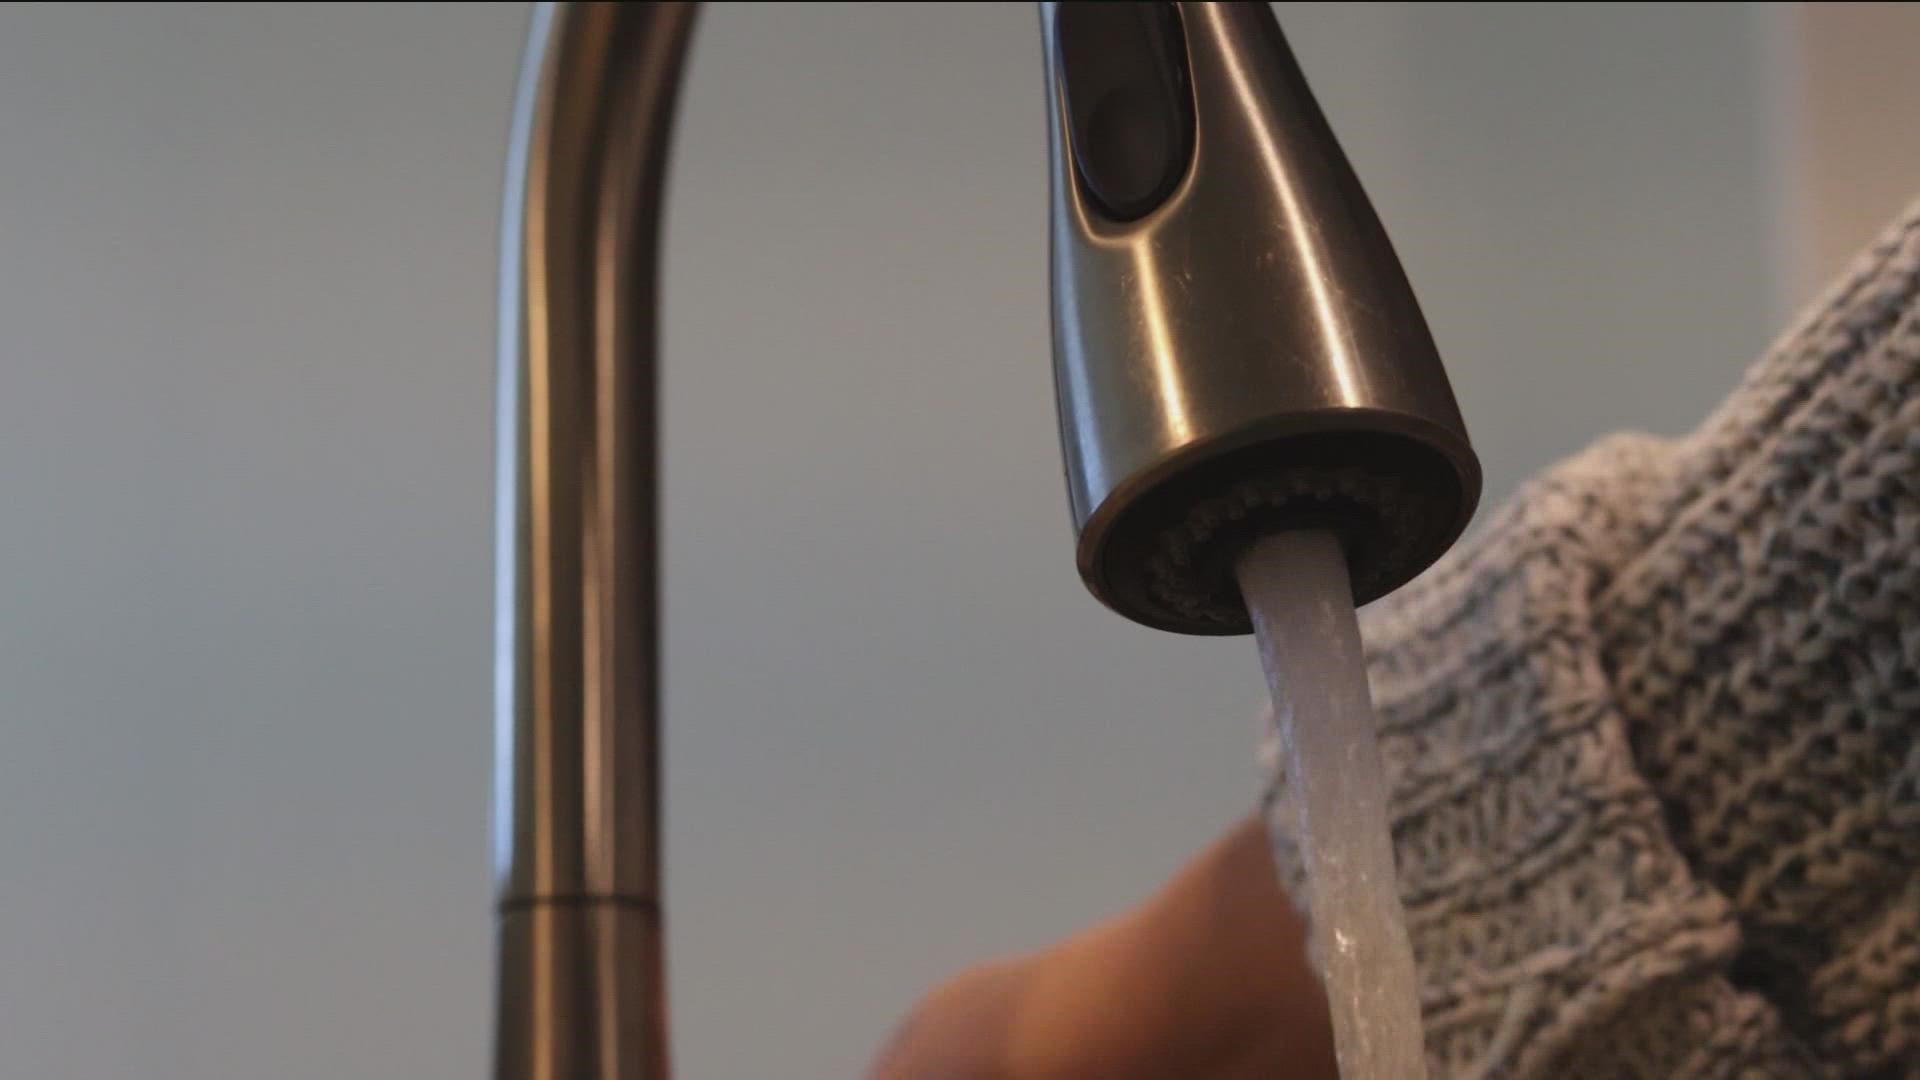 austin-water-rates-to-stay-the-same-kvue